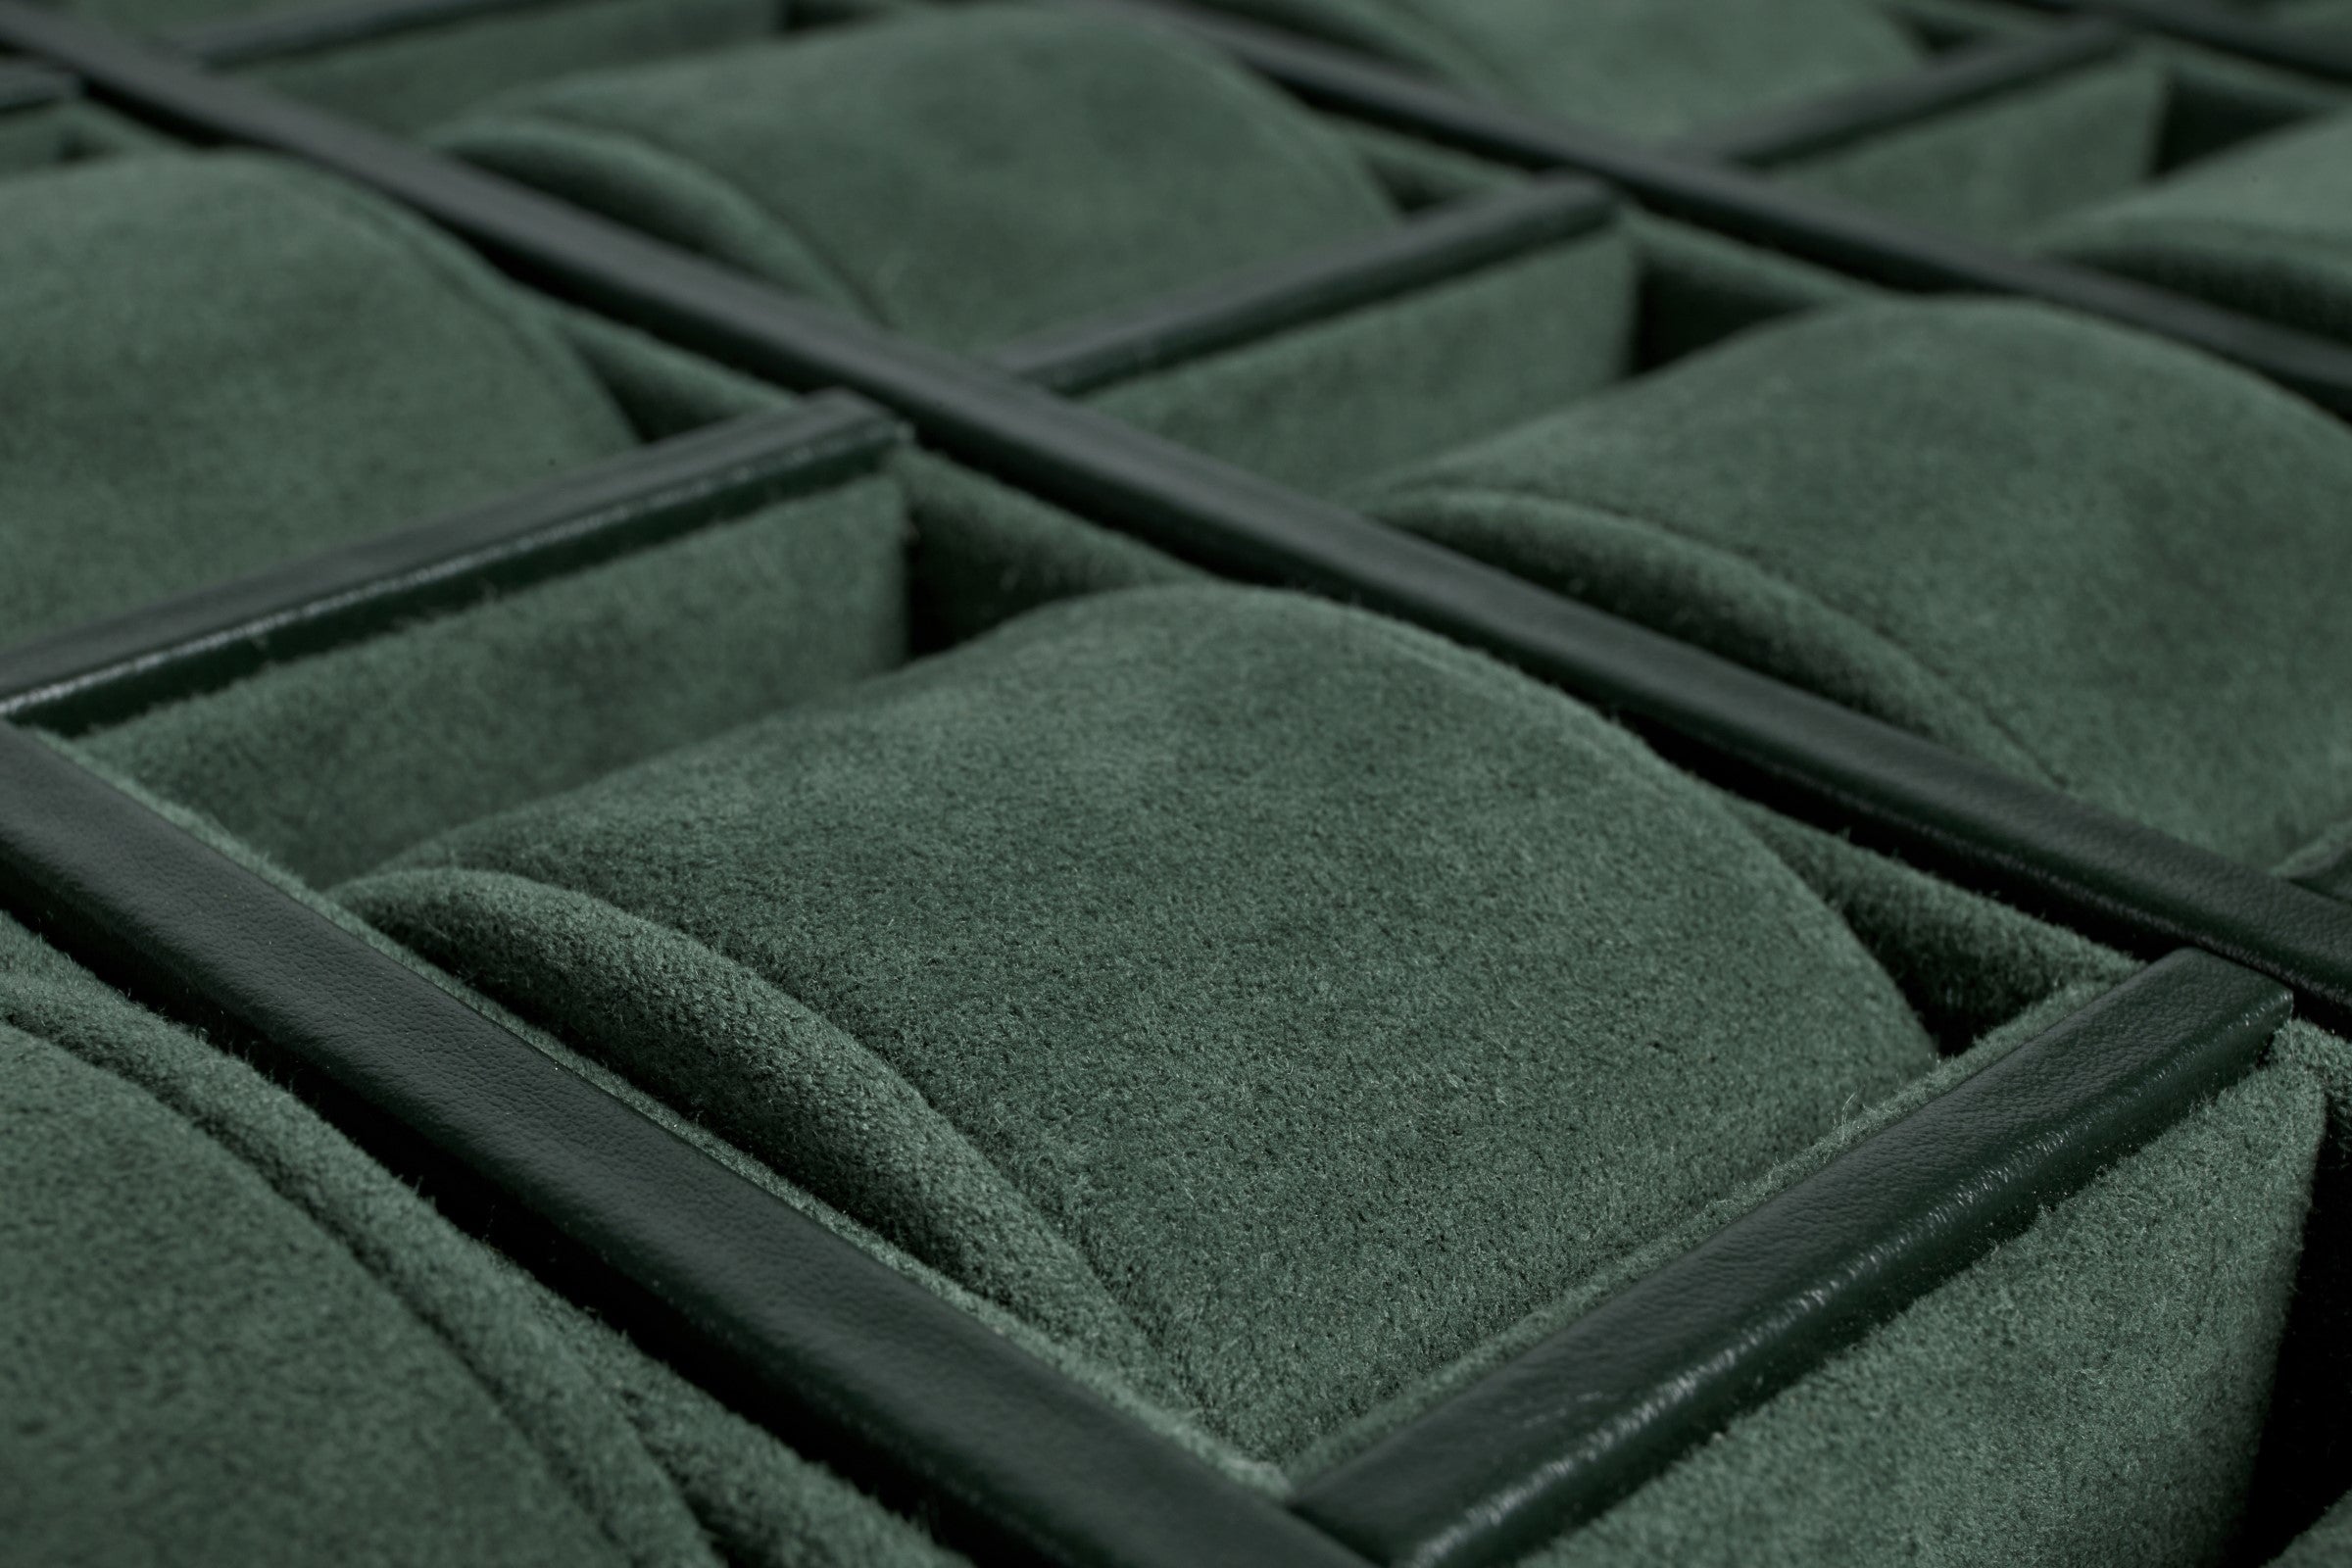 Bernardini Milano Watch Holder with 24 watches capacity- green leather and green alcantara - pillows details 